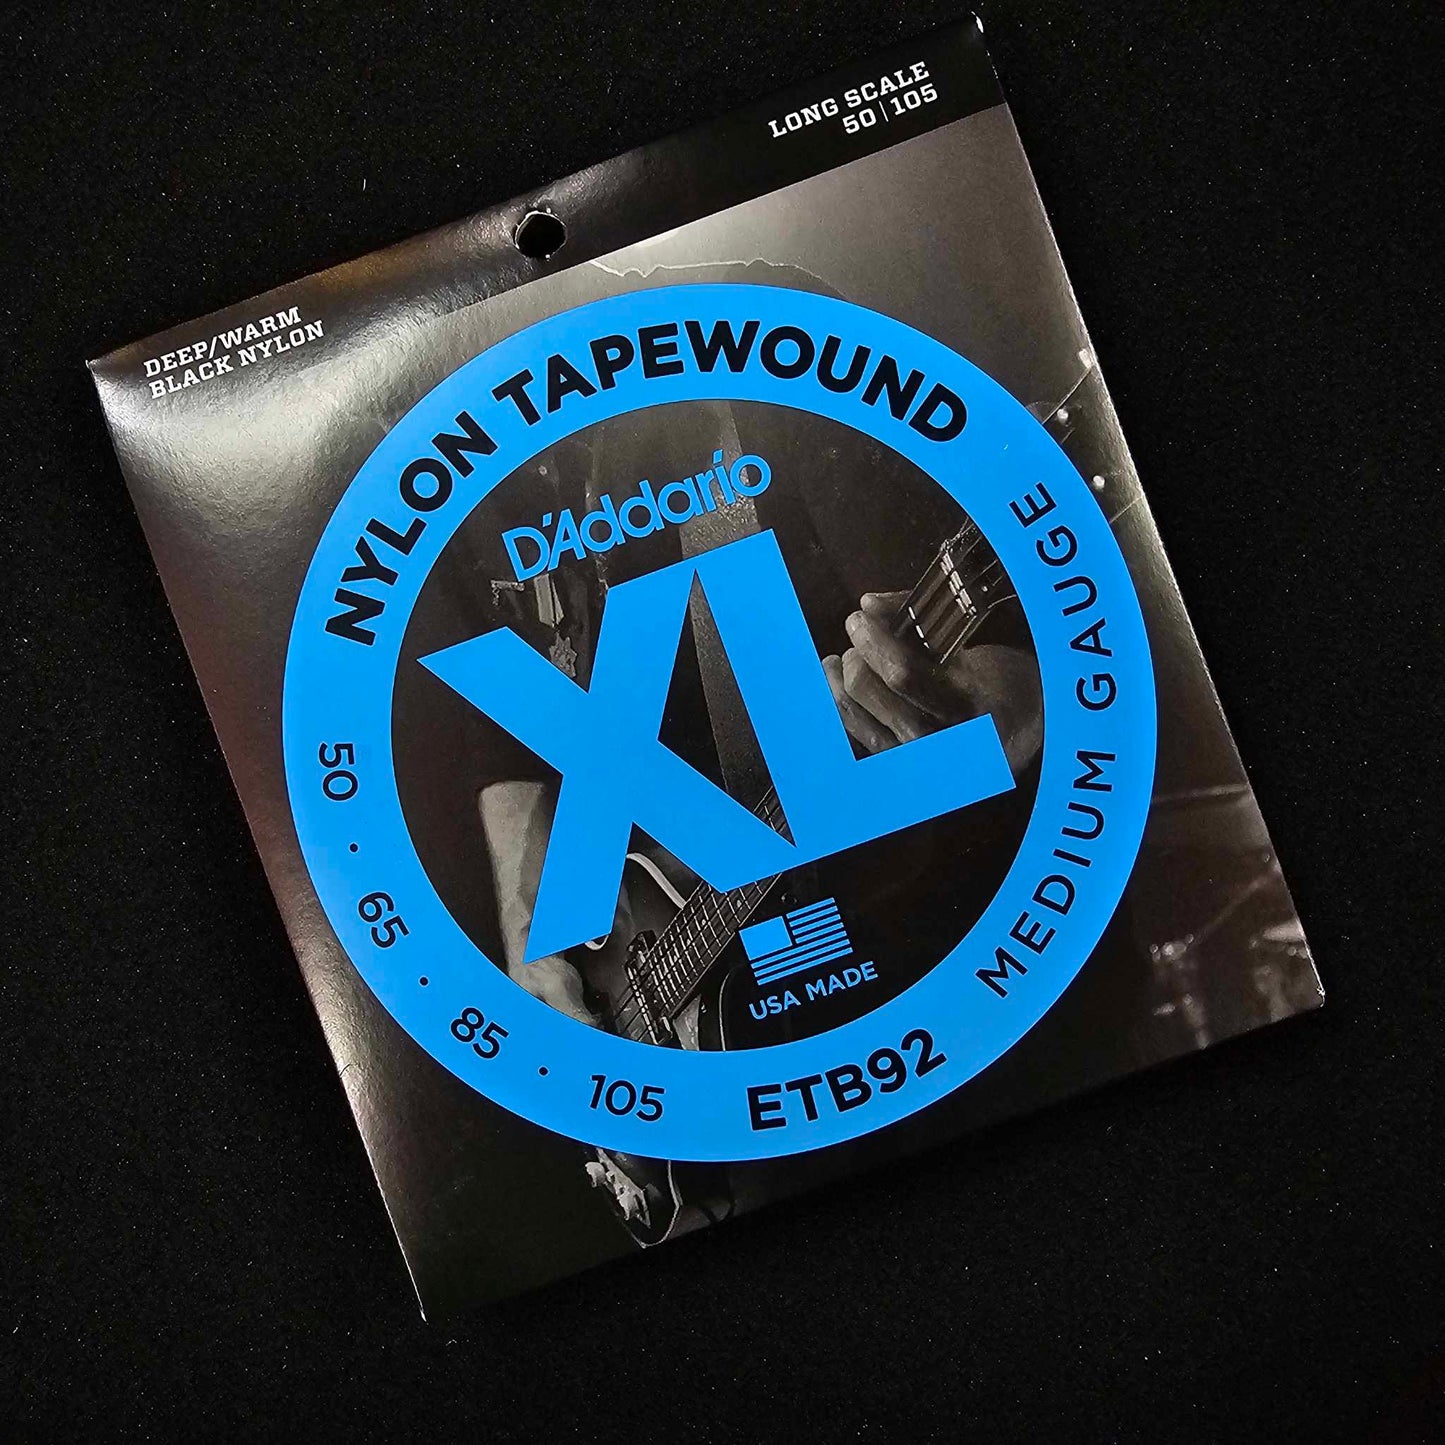 D'addario Bass Tapewound 50-105 Strings